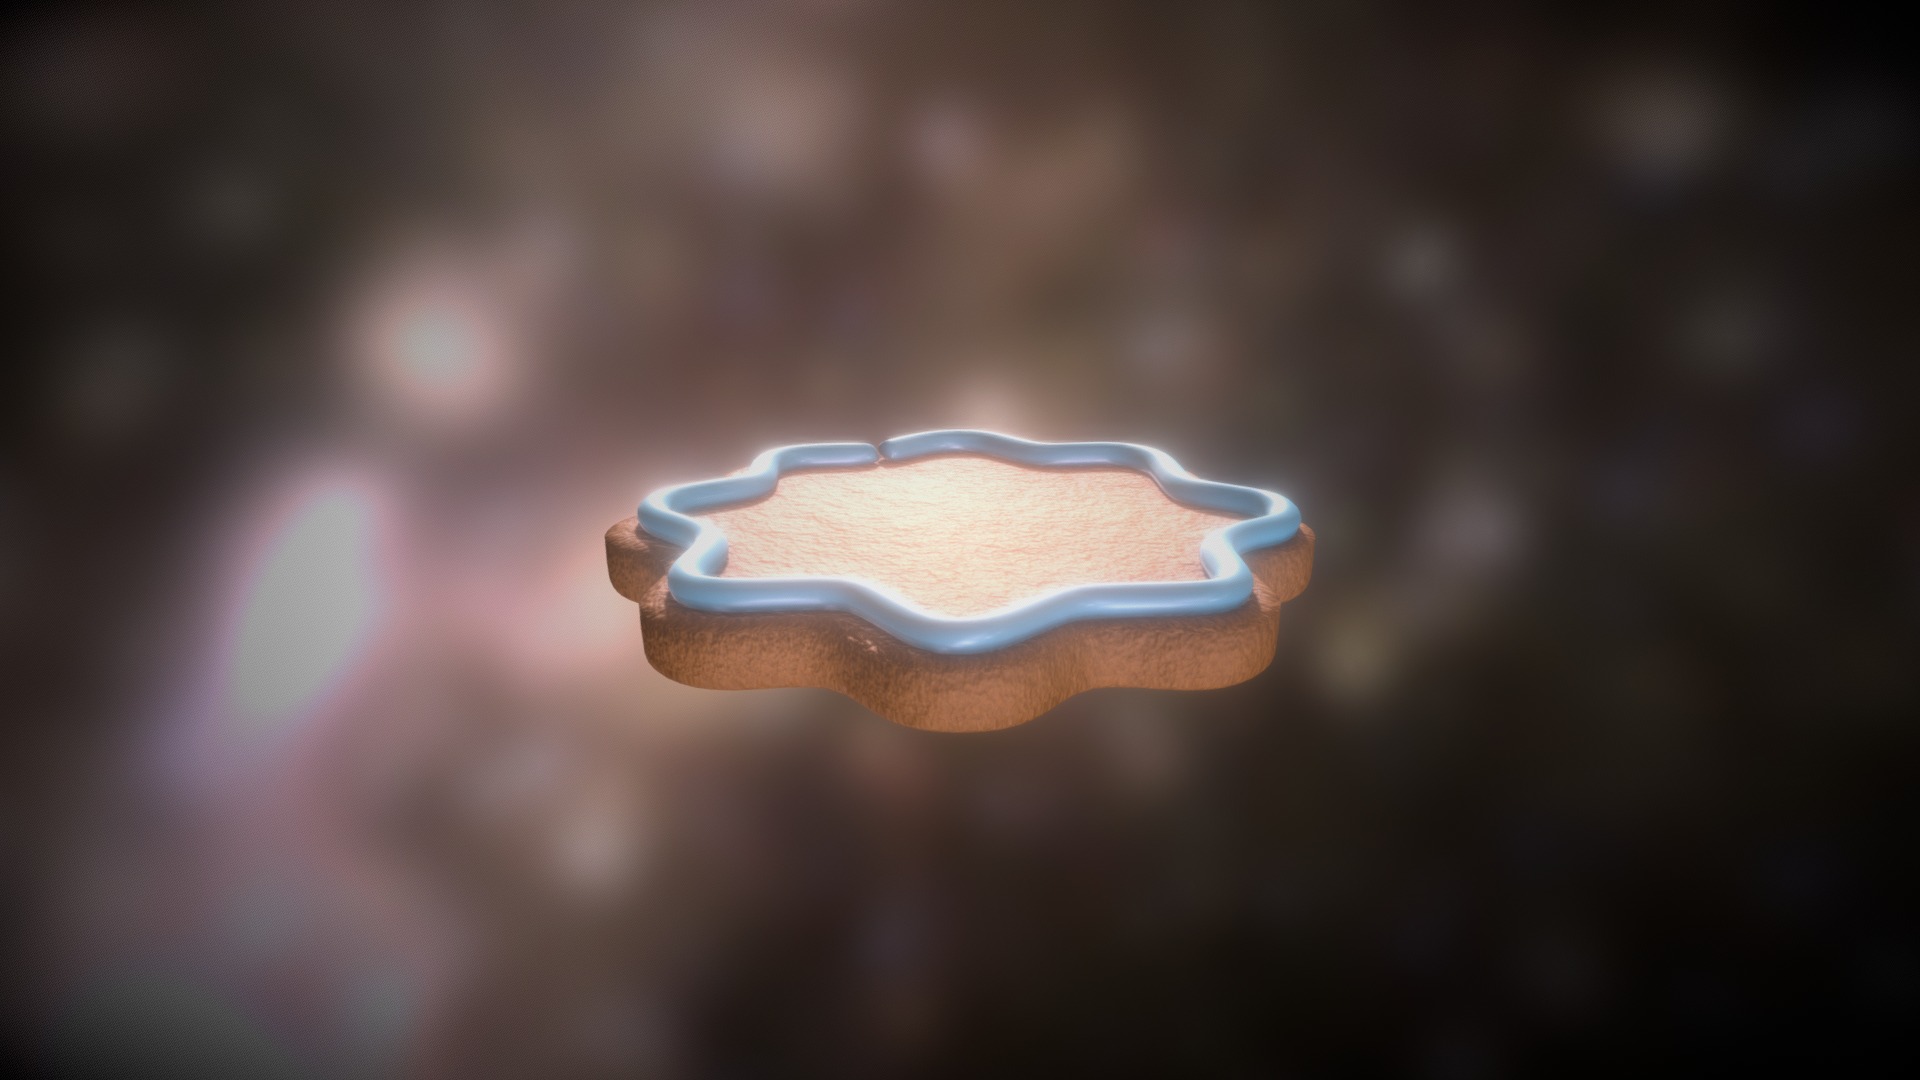 3D model Gingerbread with light blue decoration - This is a 3D model of the Gingerbread with light blue decoration. The 3D model is about a blue and white jellyfish.